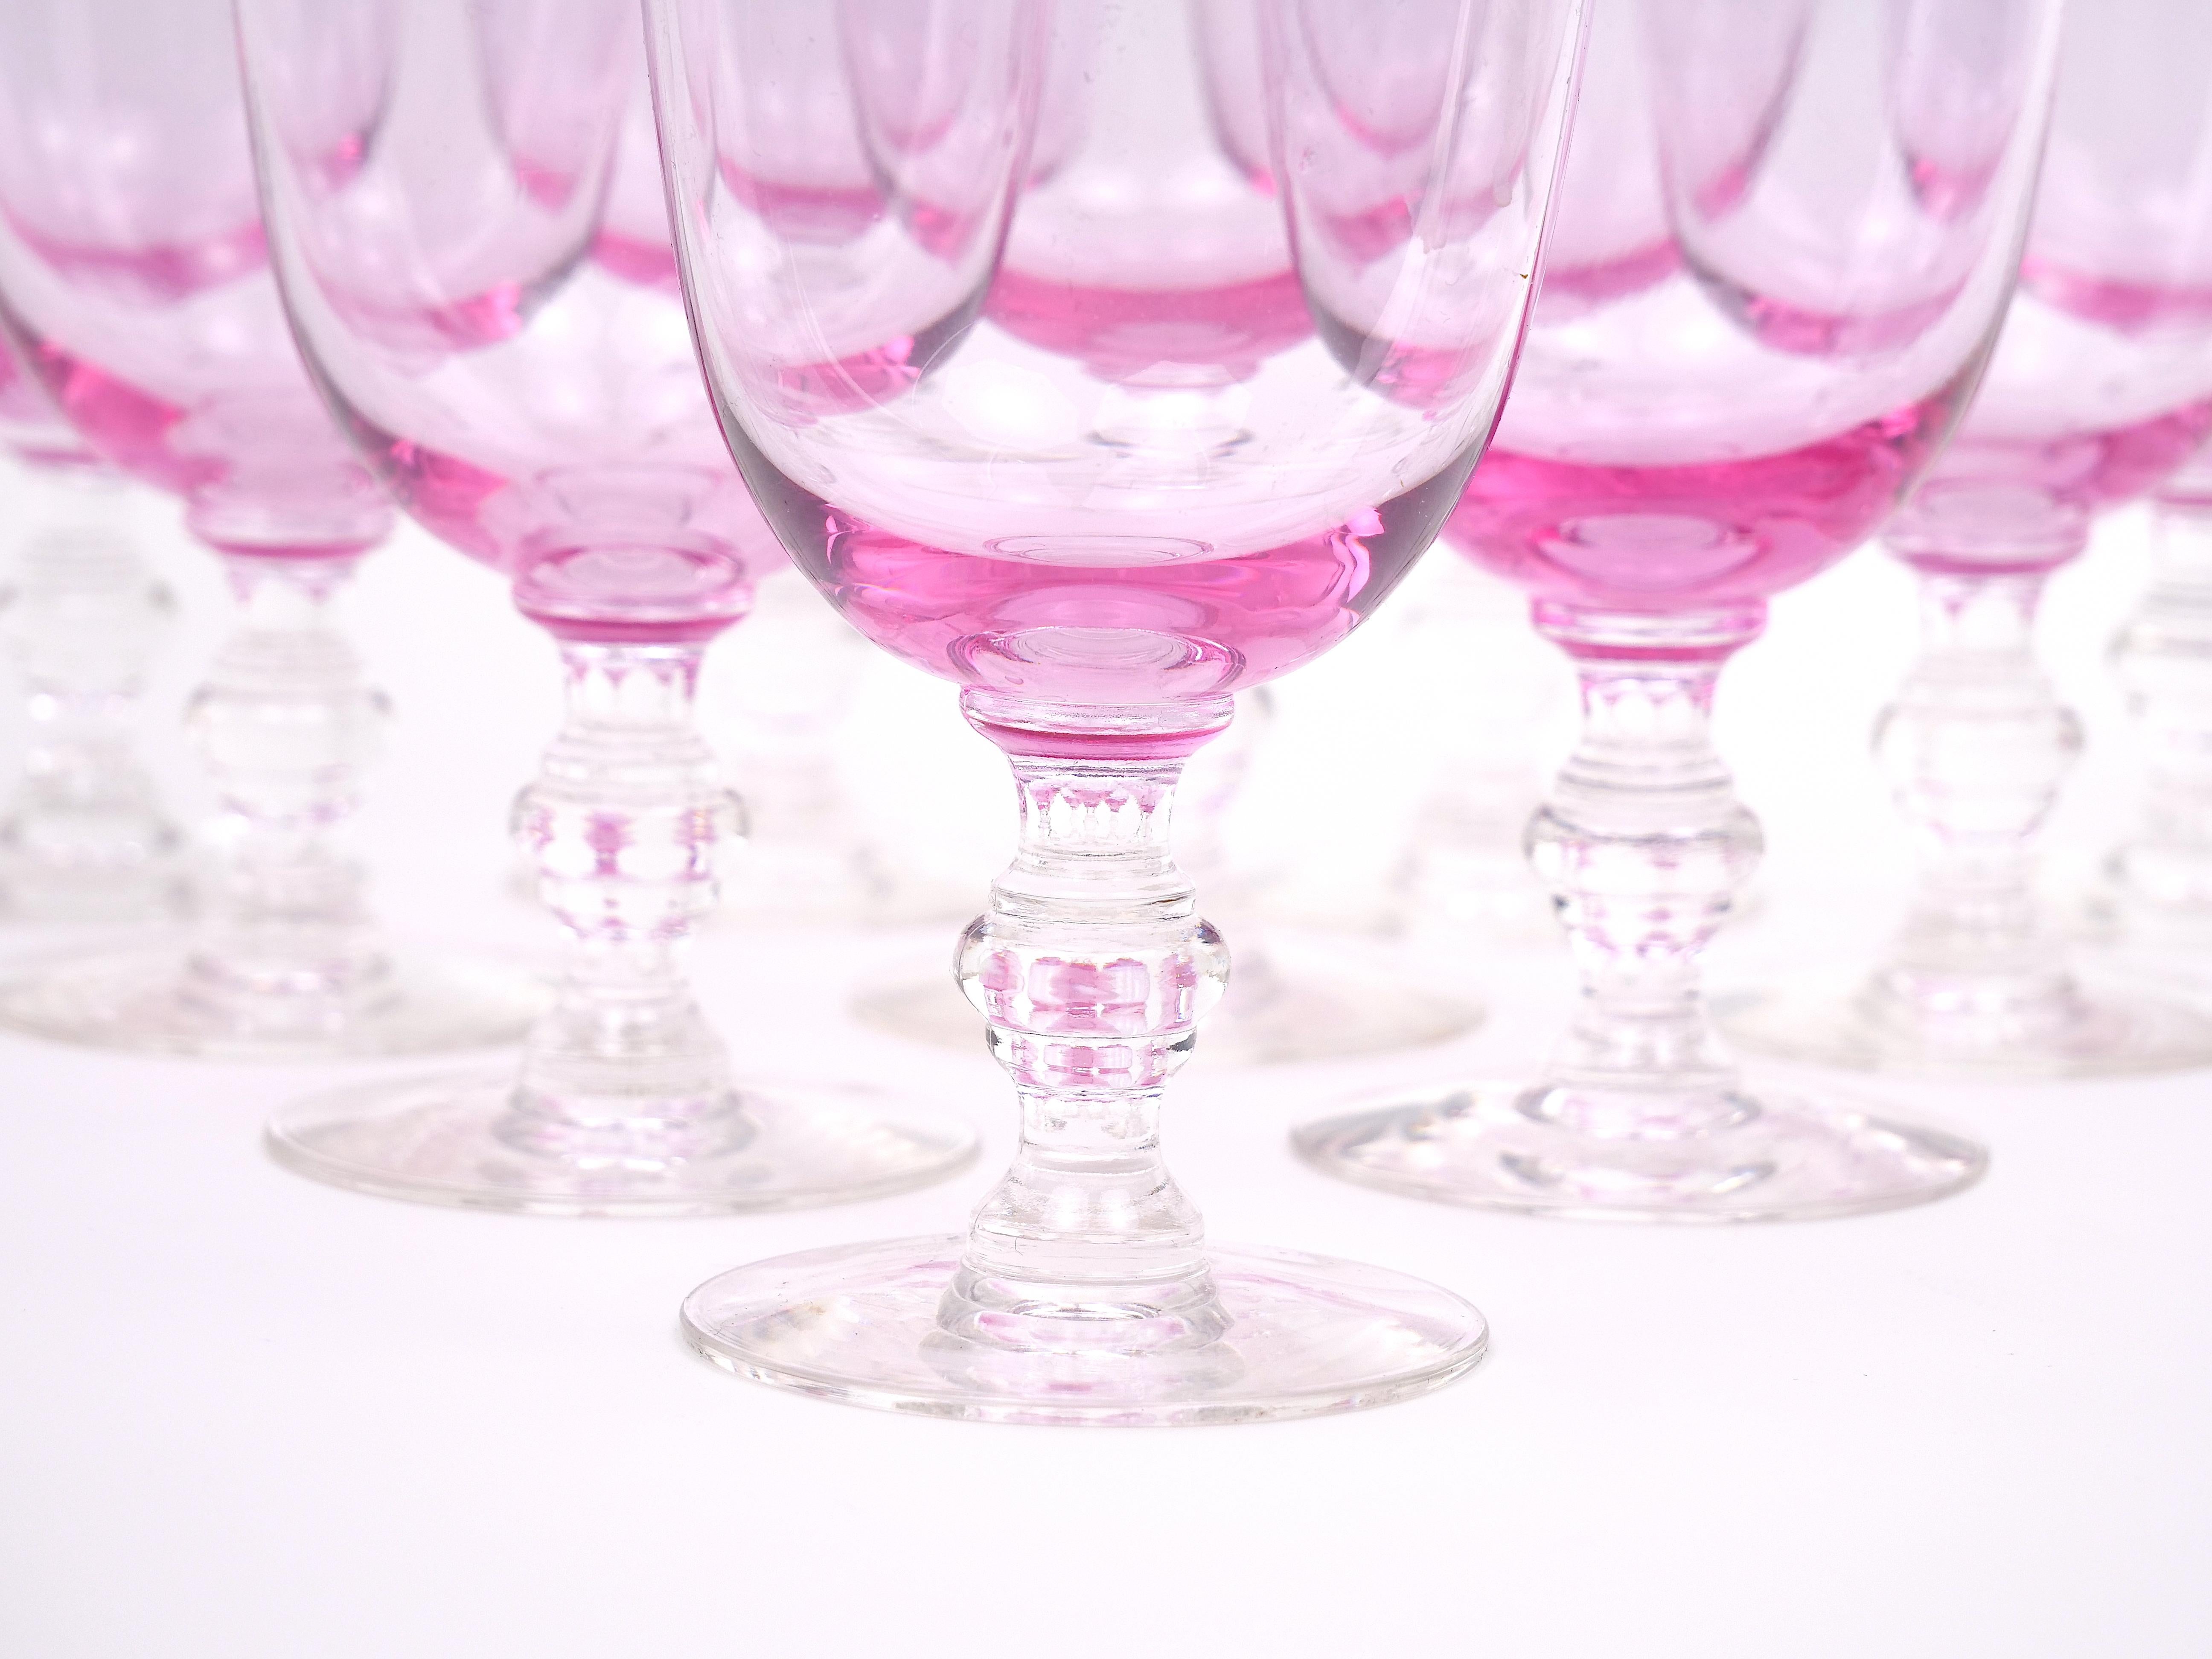 Step into a world of retro sophistication with our captivating mid century ice pink colored crystal barware goblet service for ten people. Imbued with the charm of yesteryear, this collection is sure to transport you to a bygone era of elegance and